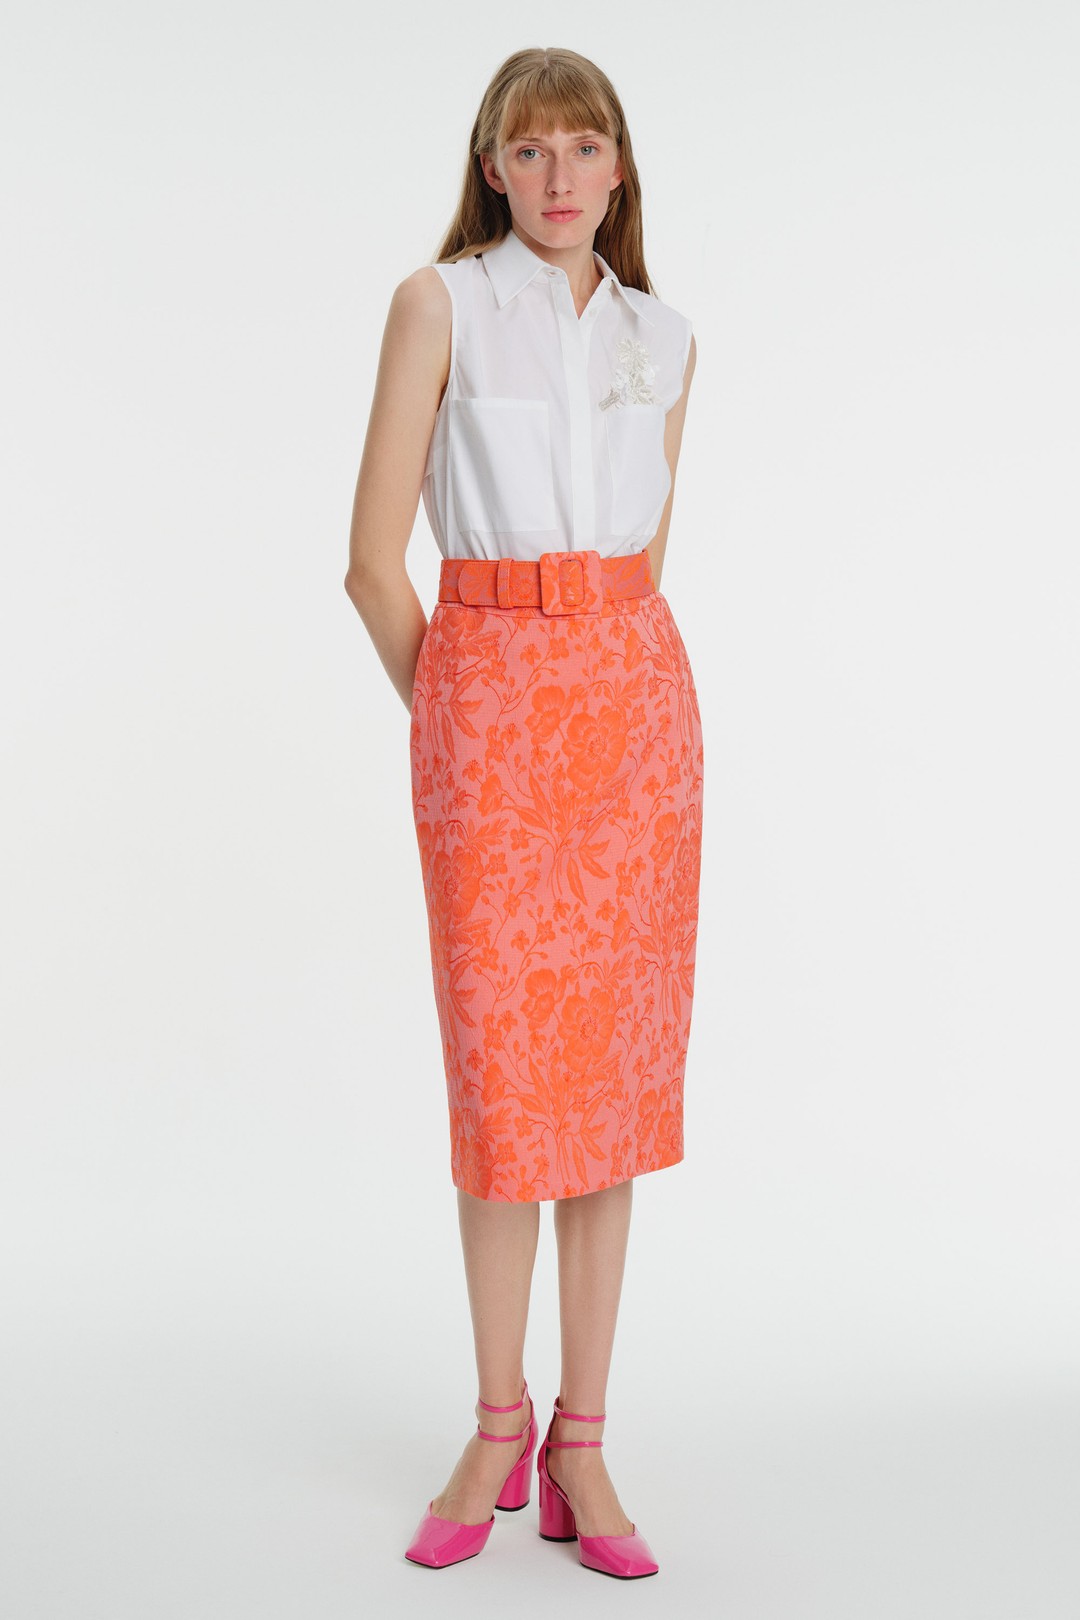 Floral Patterned High Waist Pencil Skirt with Belt 1